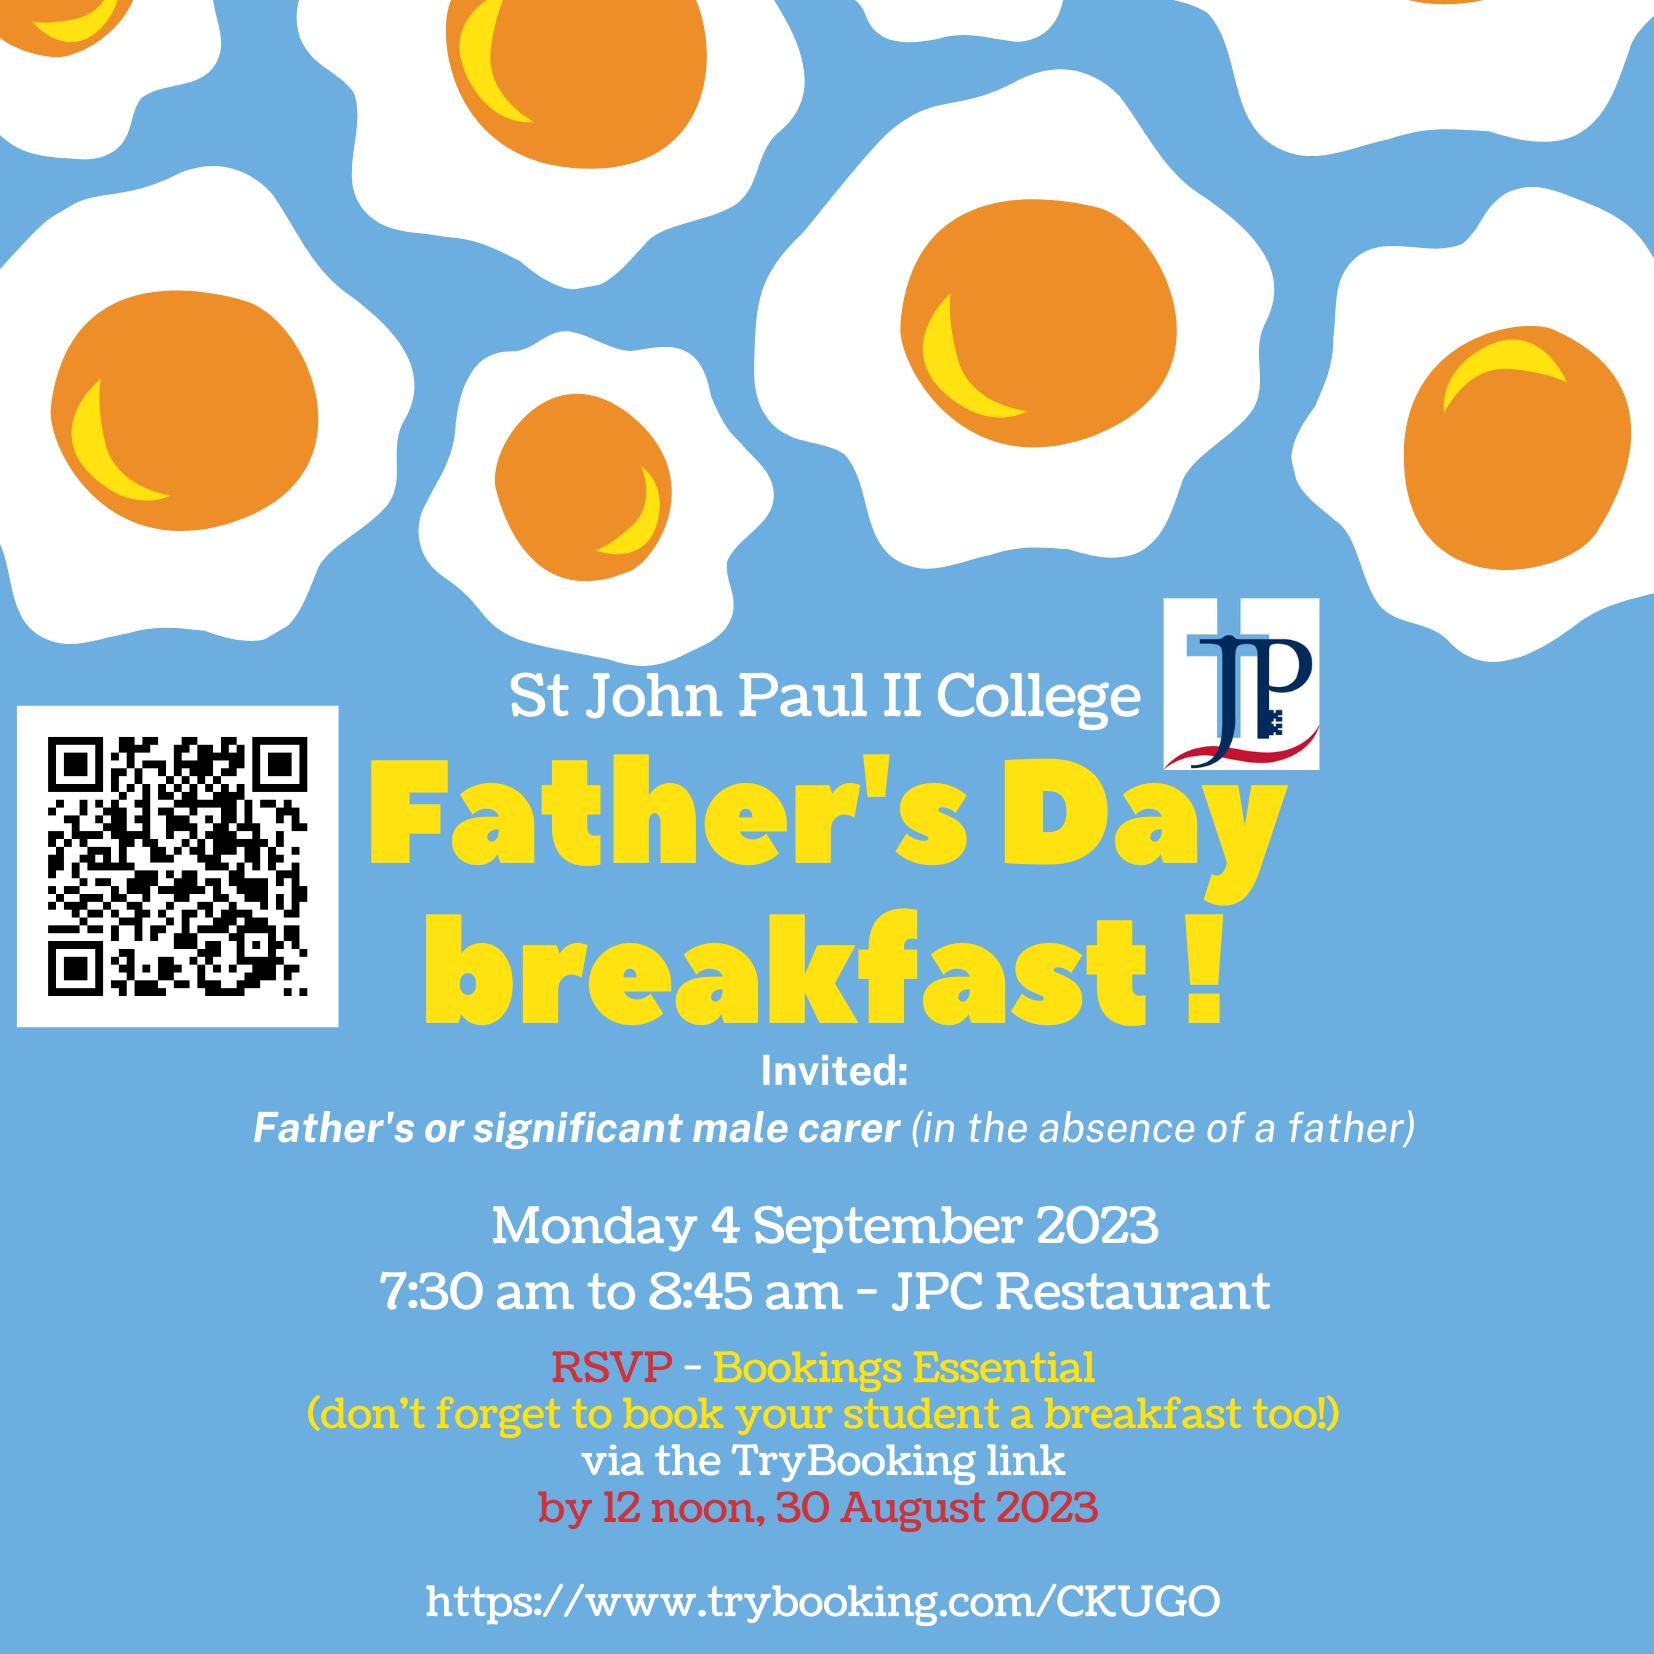 Father's Day Breakfast featured image